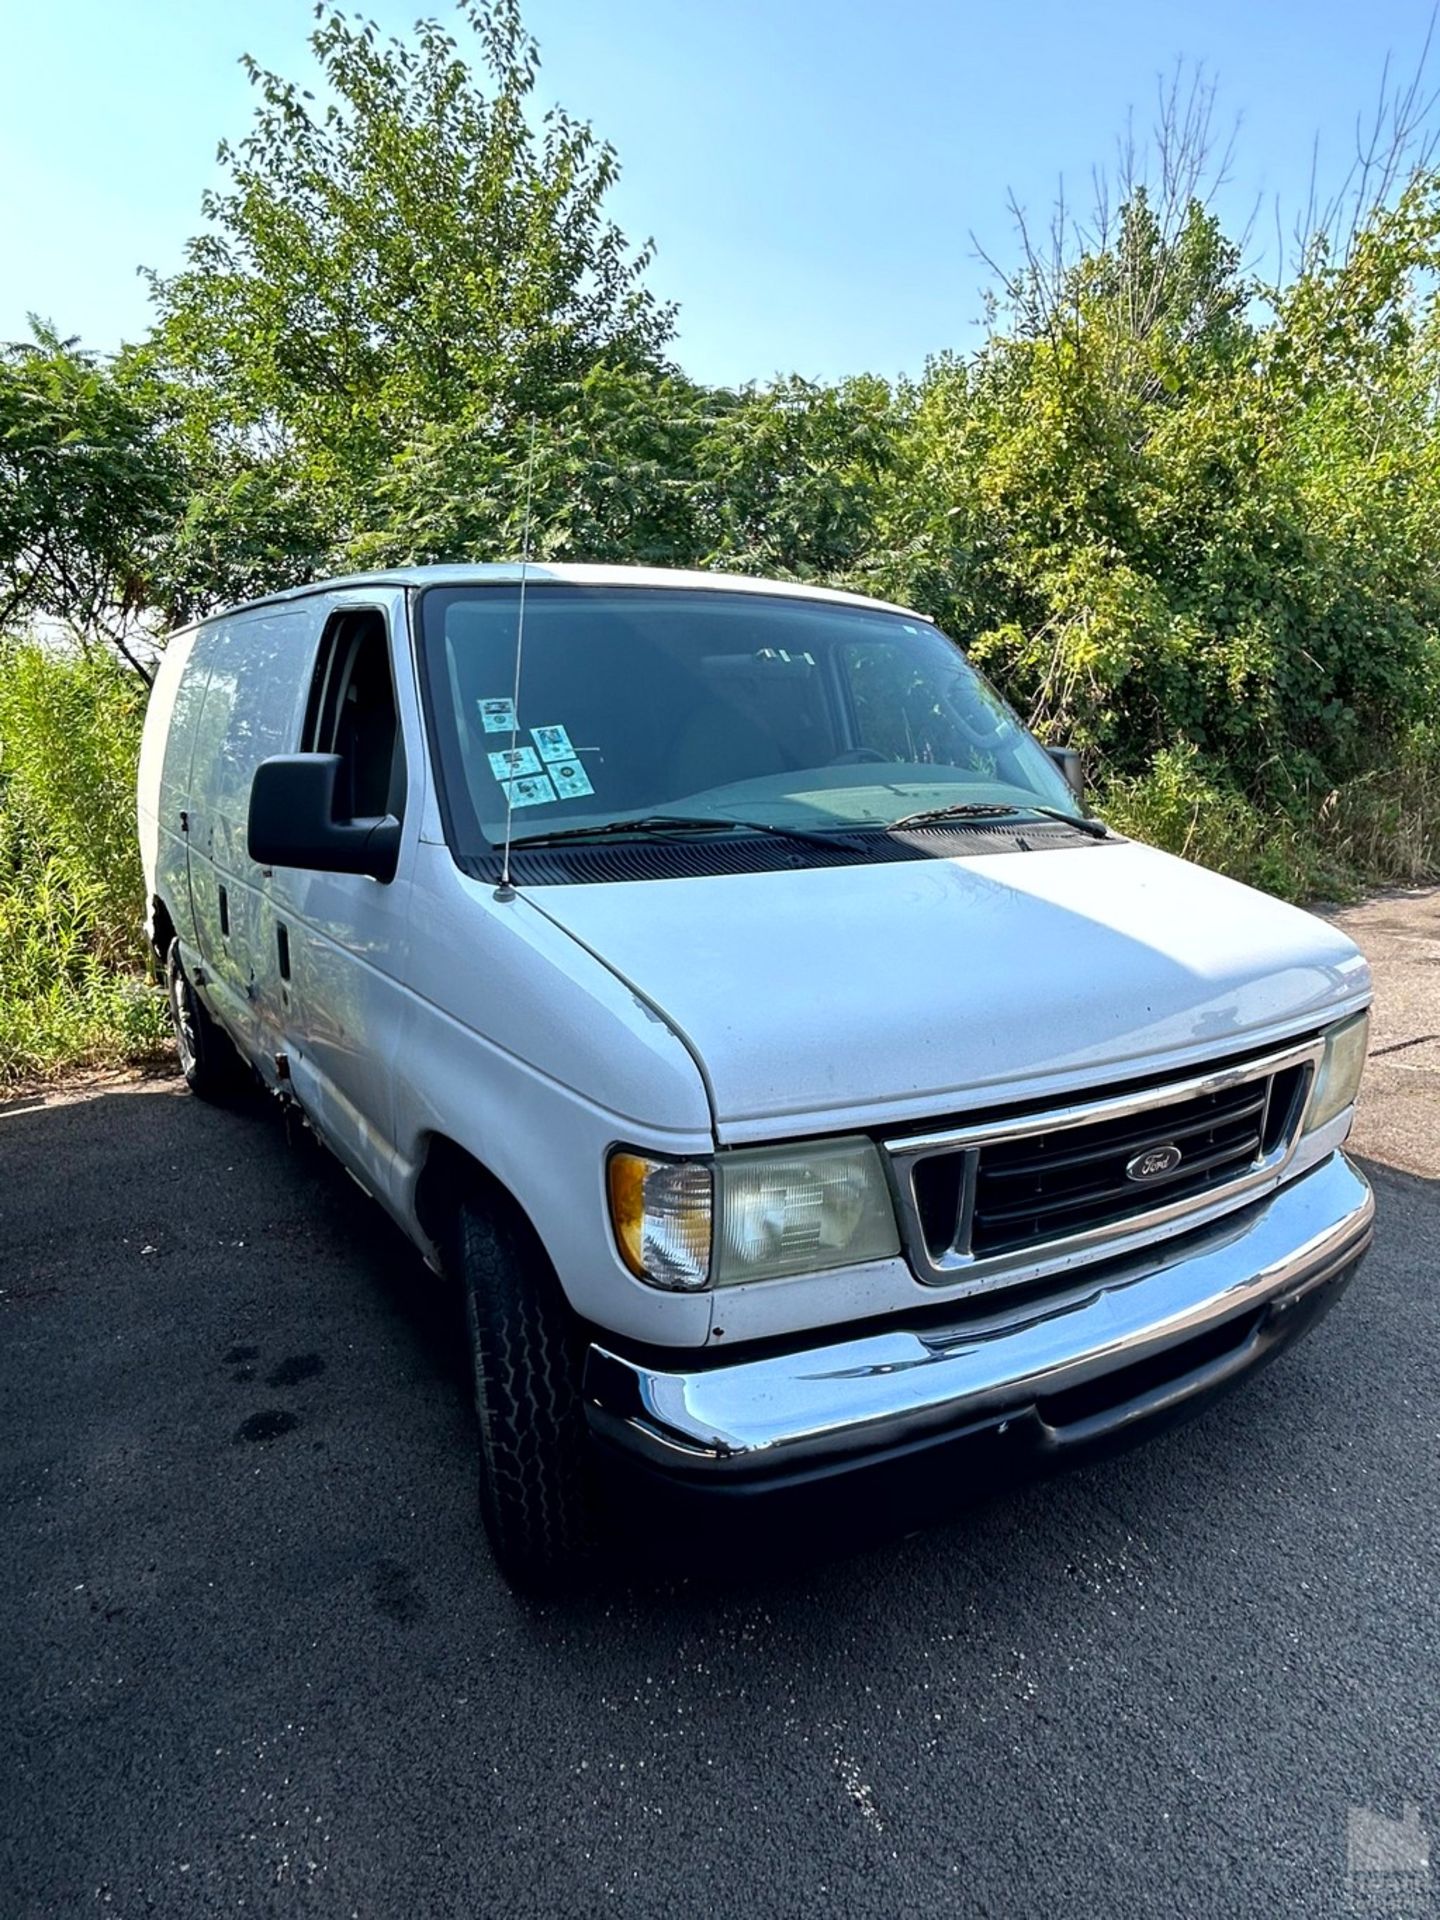 2002 FORD E150 VAN VIN: 1FTRE14253HA58959 369, 389 MILES V6 GAS 2WD NOT RUNNING WITH TITLE AND KEYS - Image 4 of 8